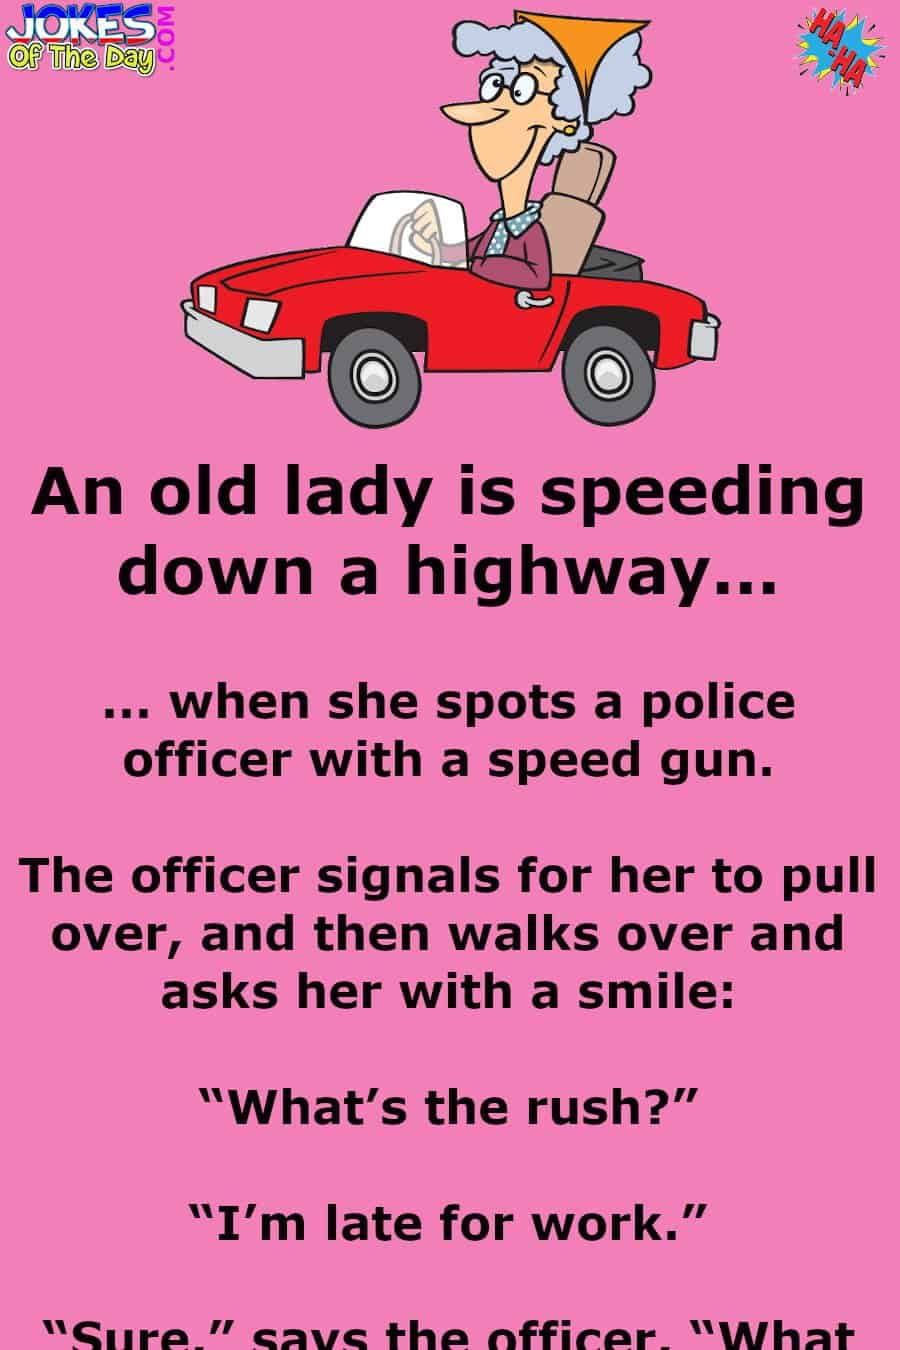 Funny Police Joke - An old lady is speeding down a highway